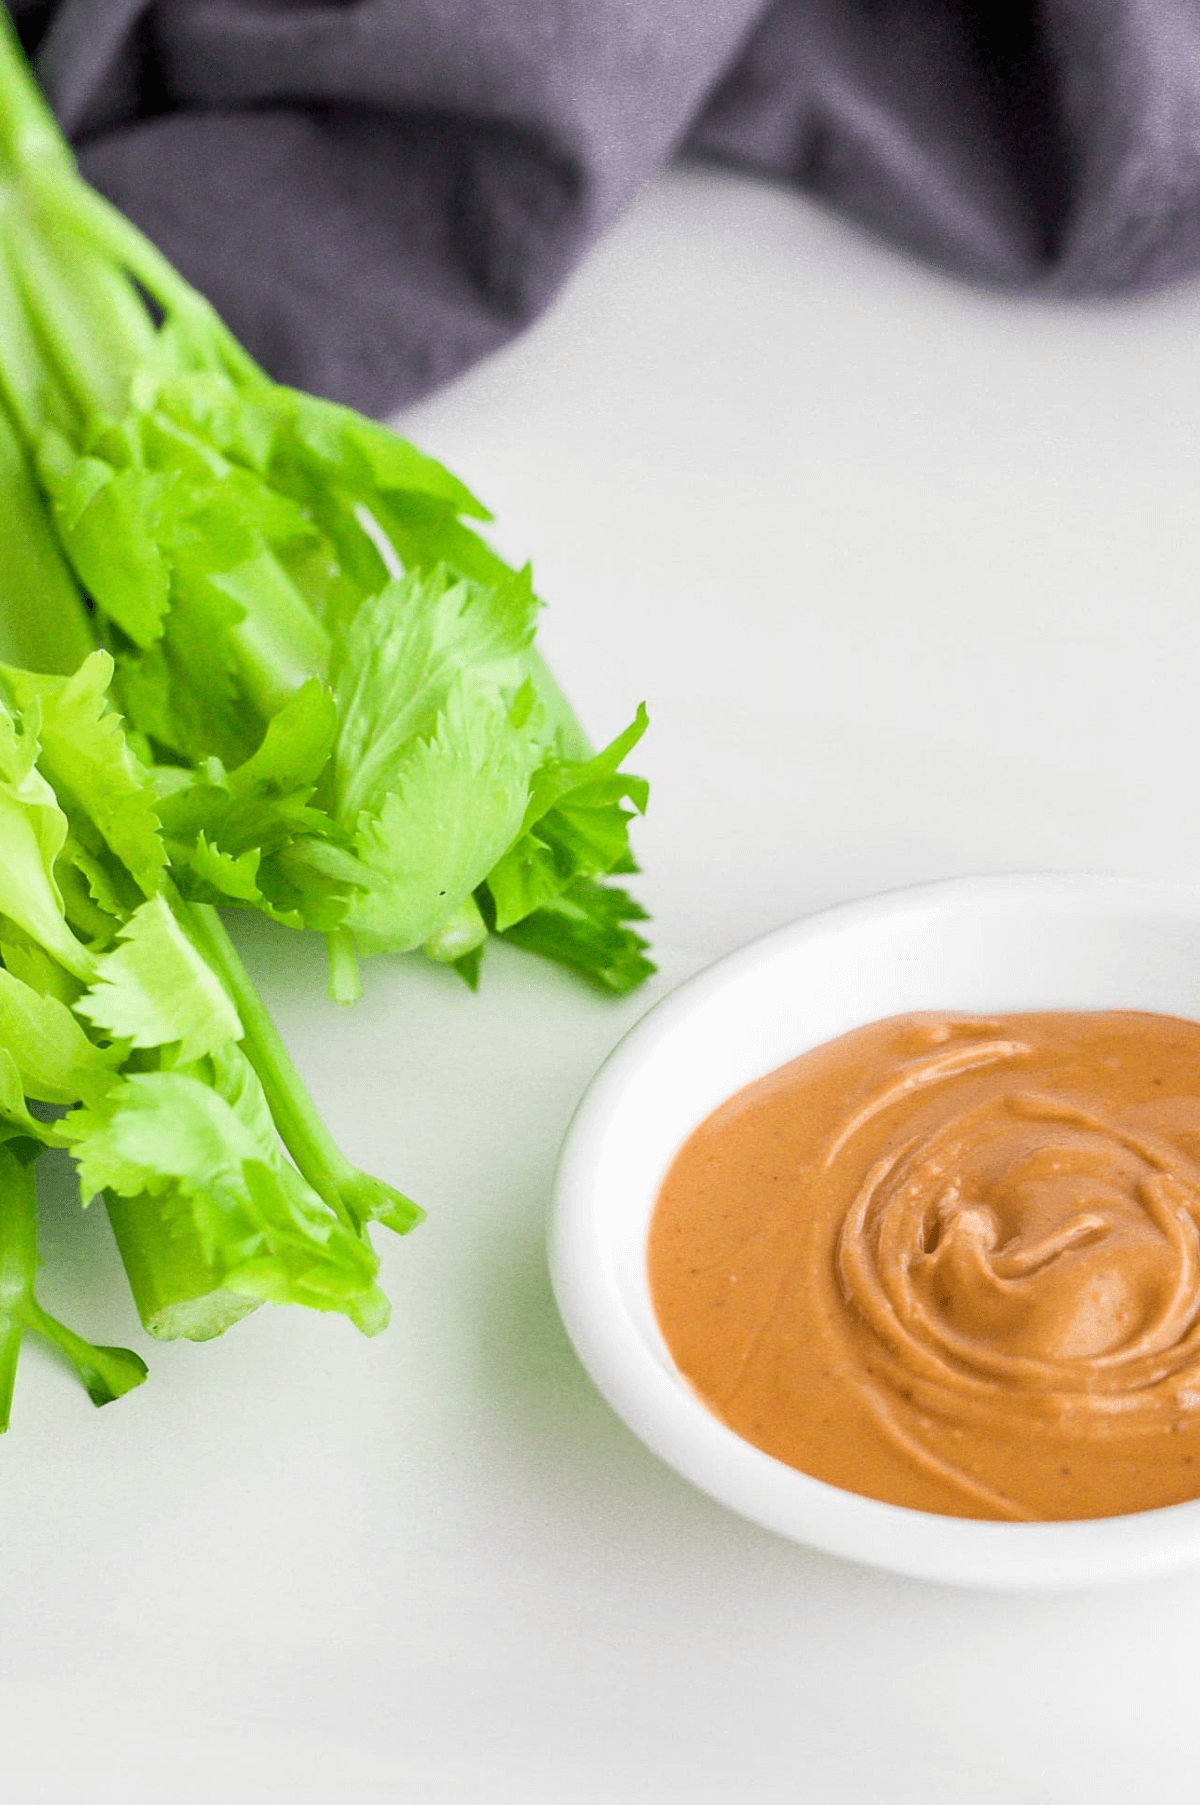 20 Easy Snacks to Add to Your Client's Next Meal Plan: celery with peanut butter